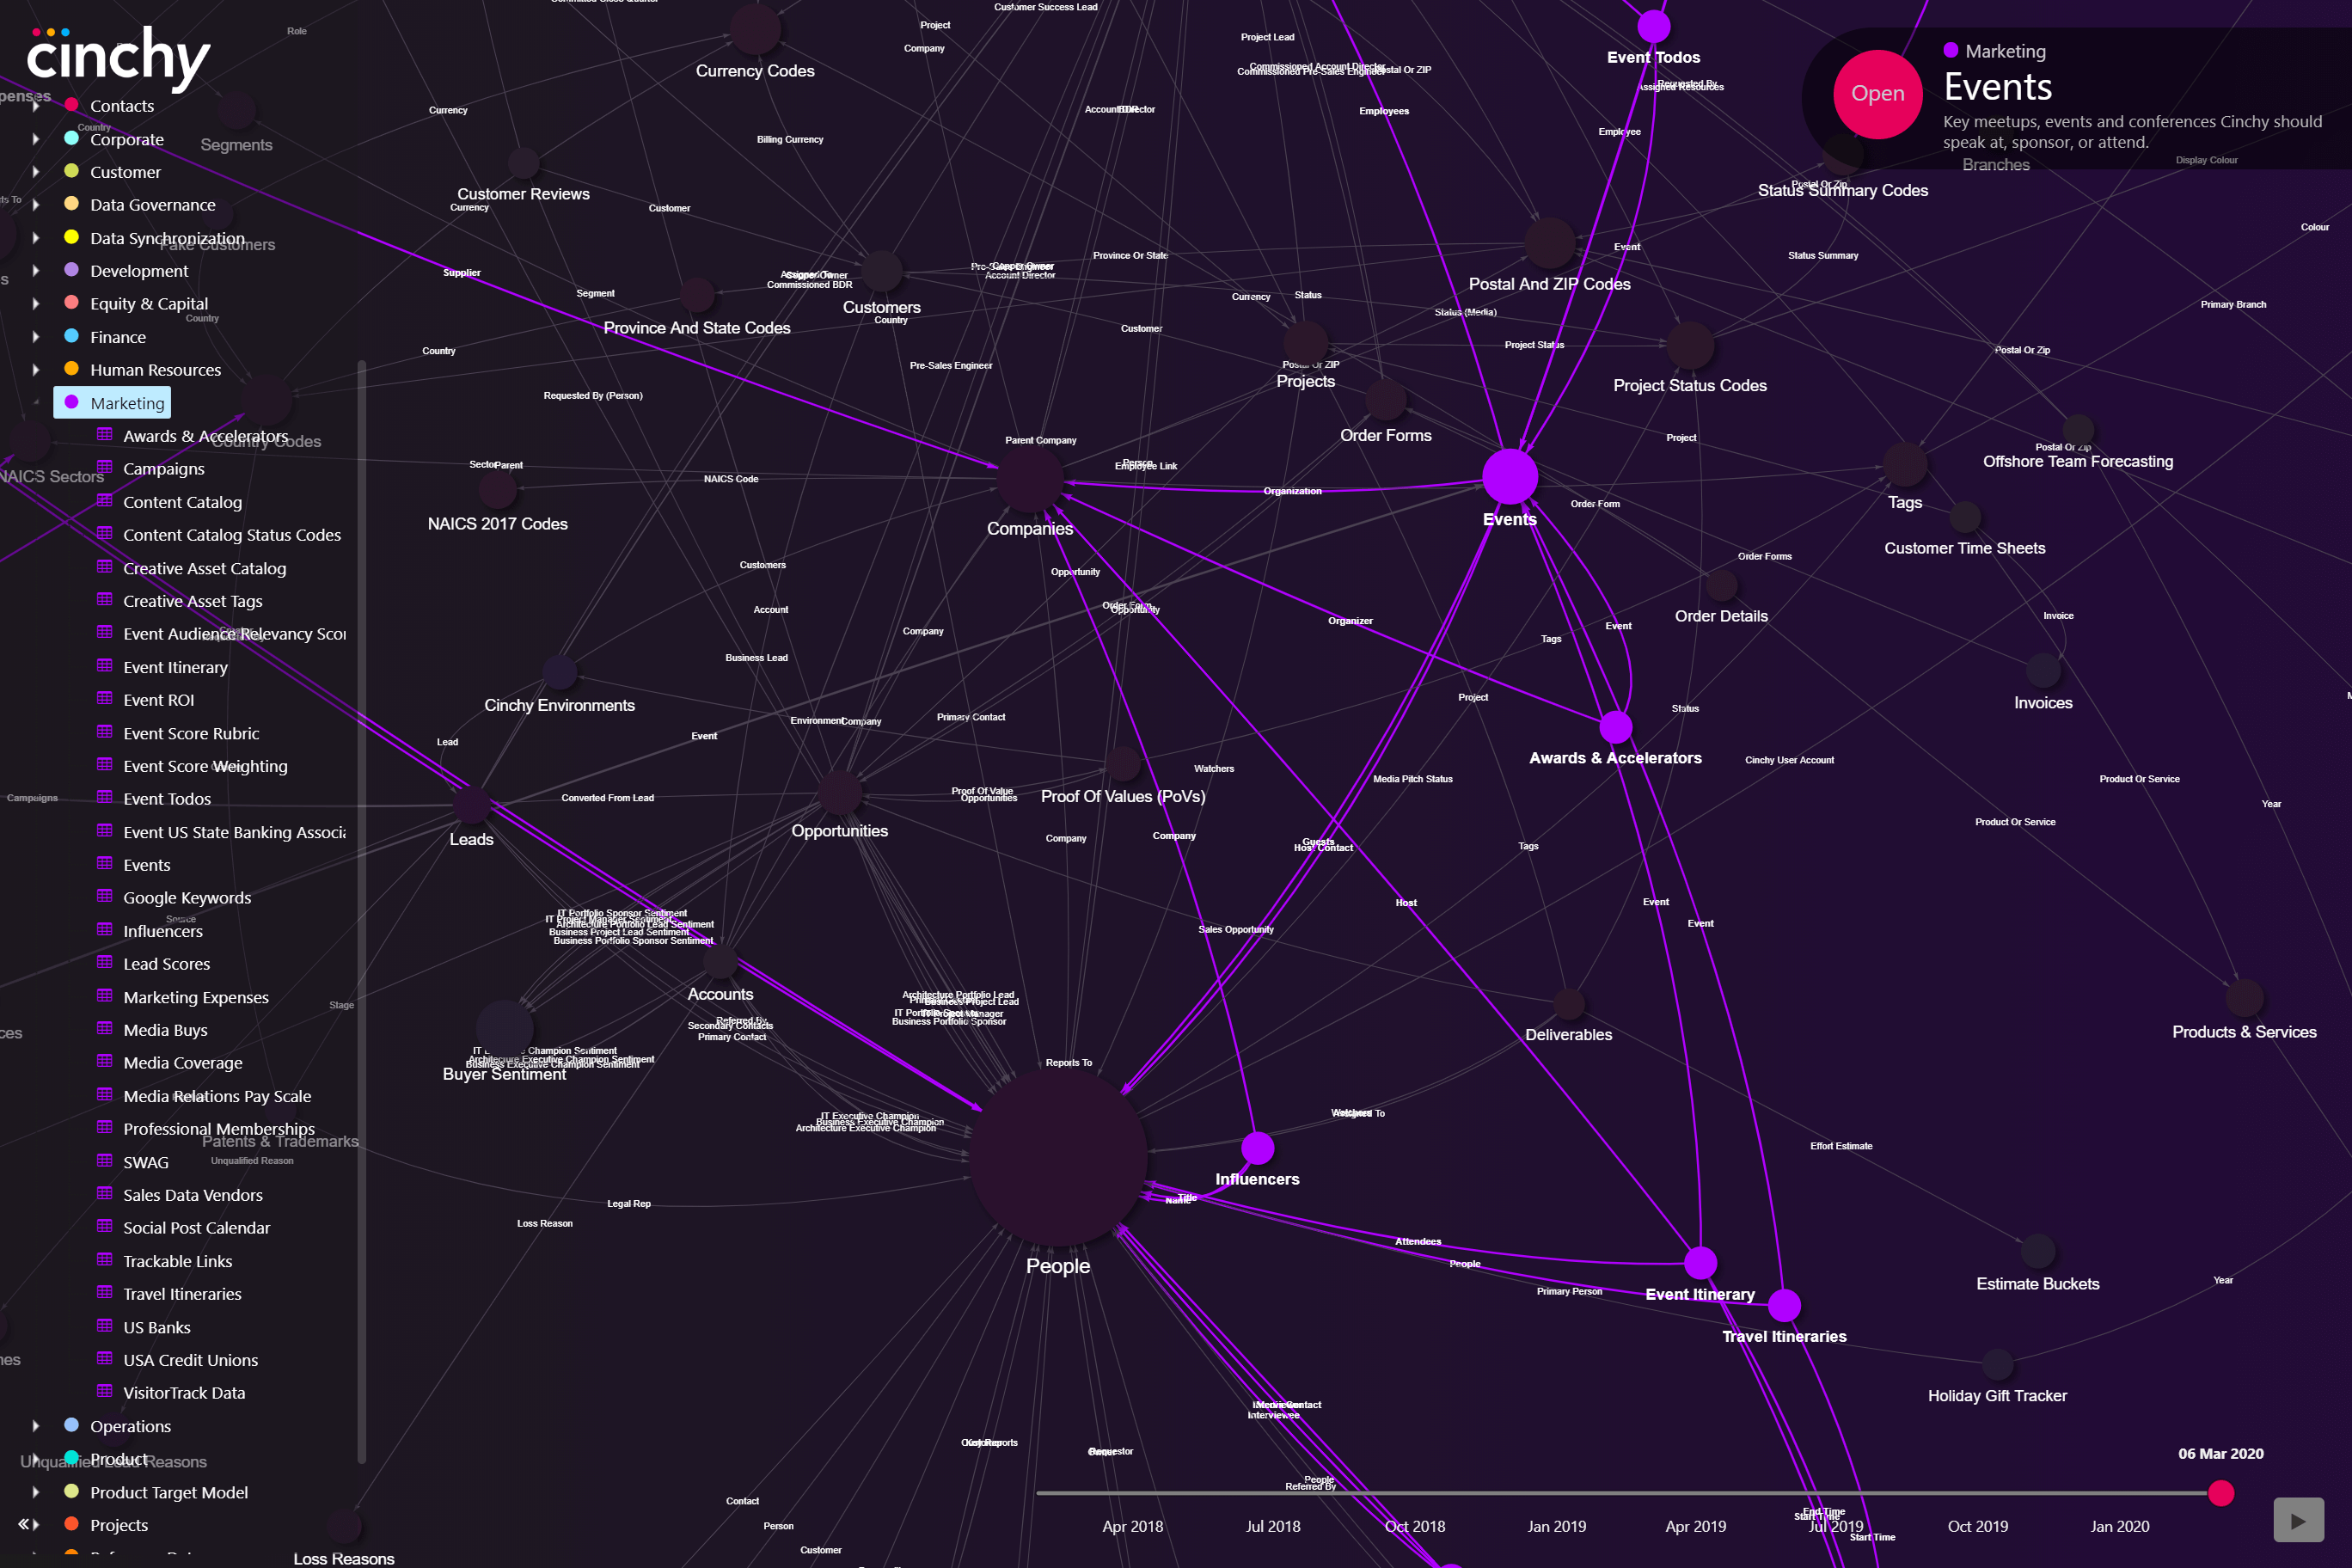 Data Network Visualizer 3 (later stage with marketing subnet highlighted)